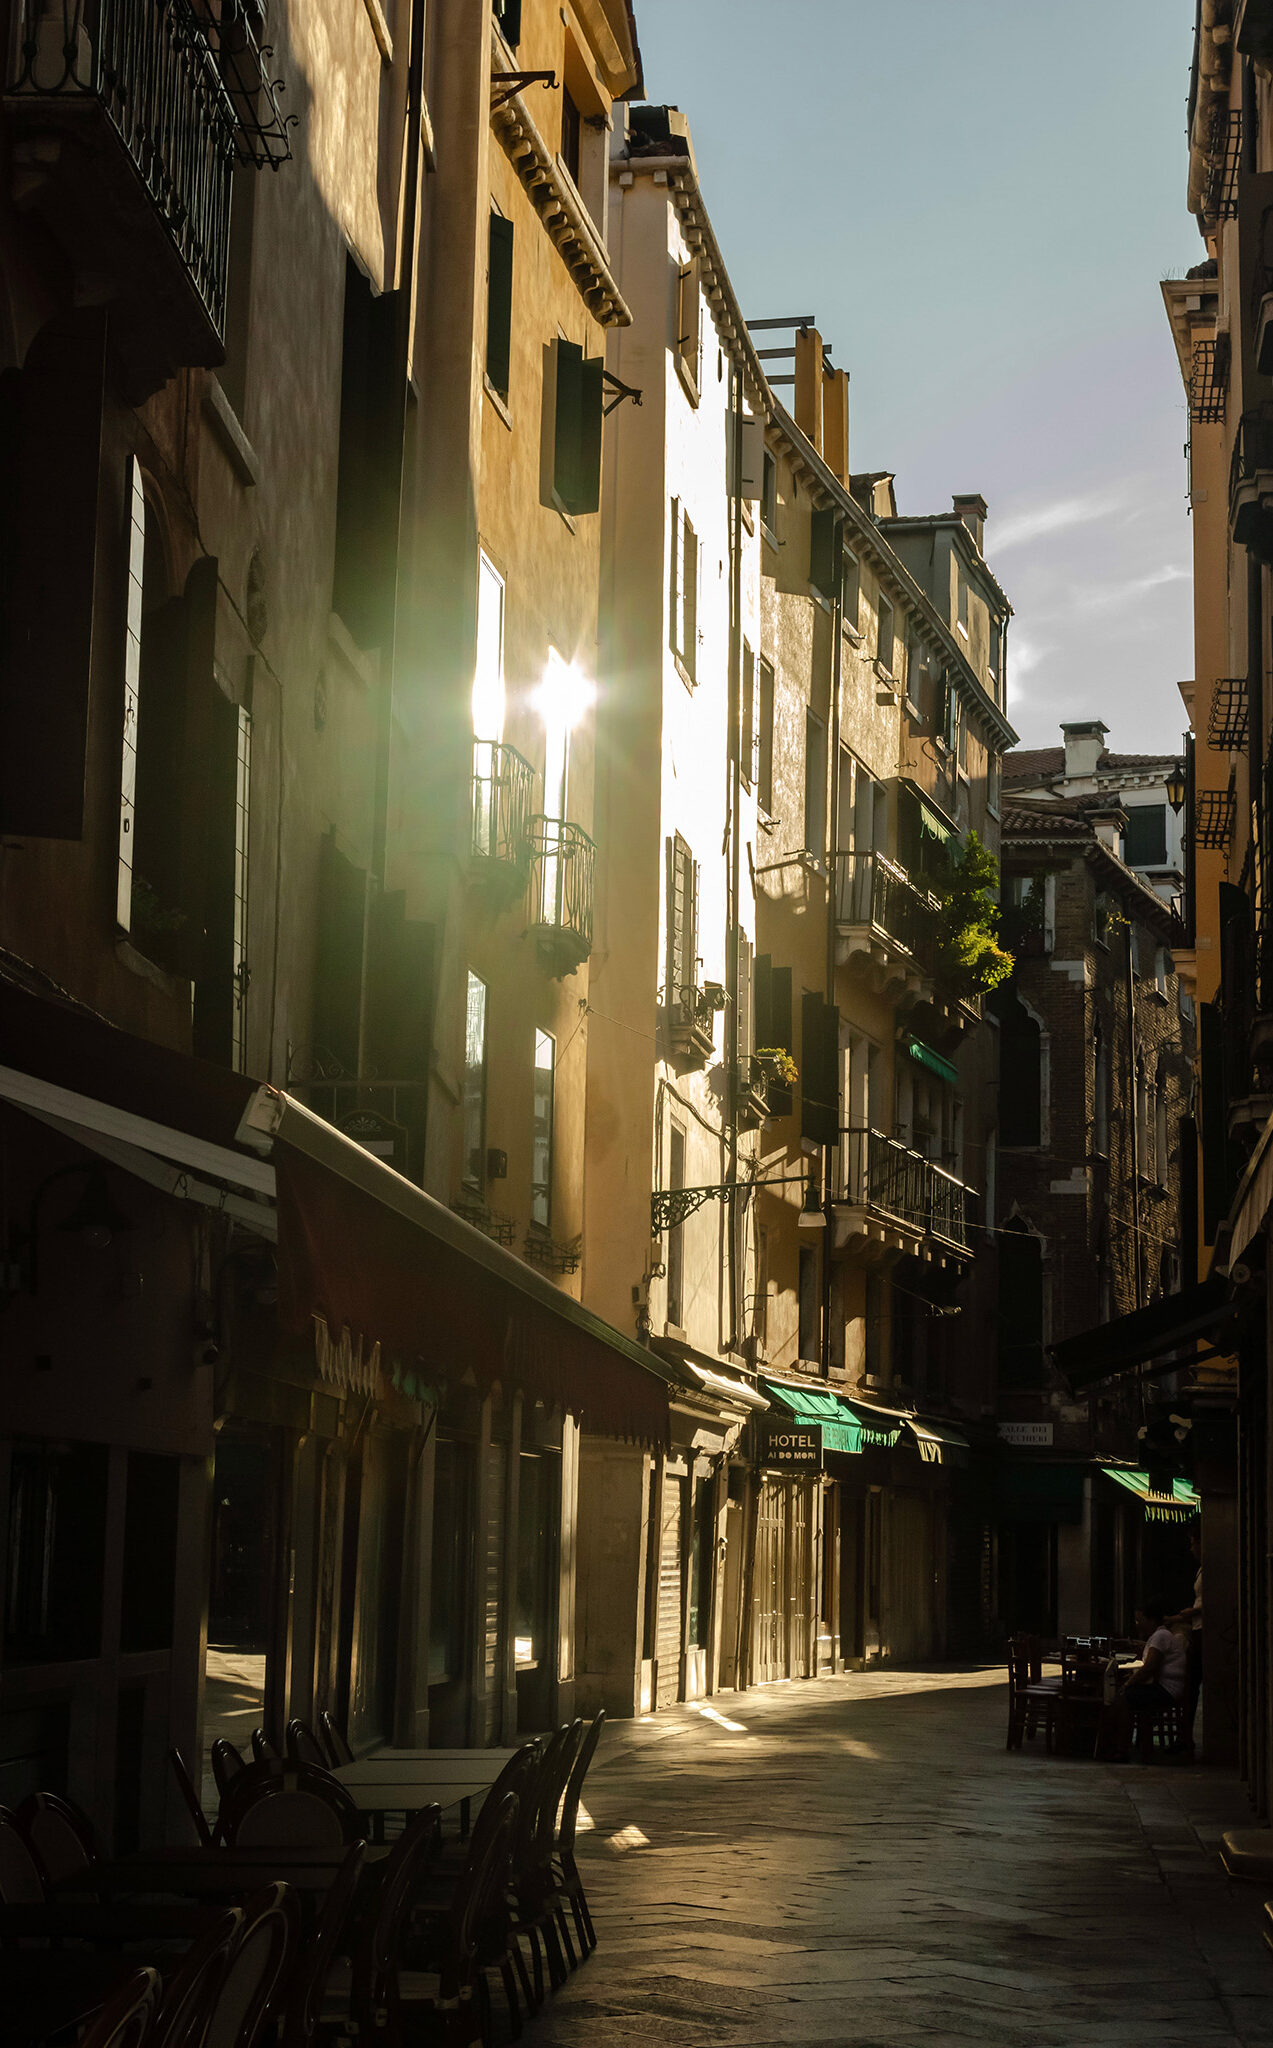 Winding street in Venice with morning sunlight gleaming off the apartments windows onto the street below.